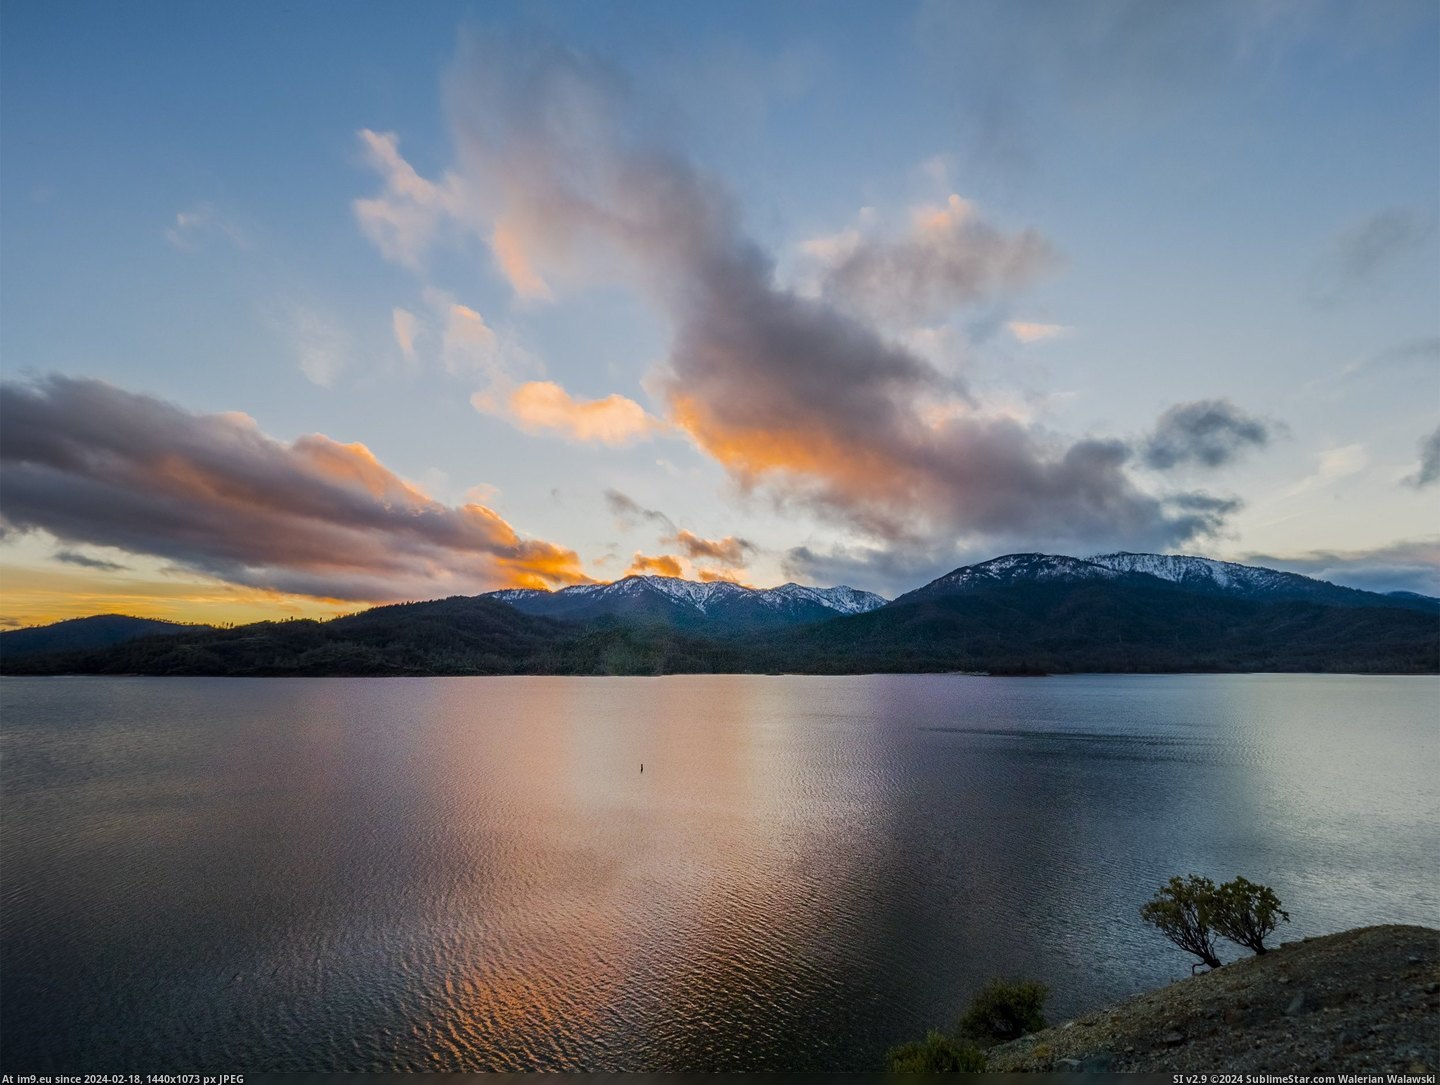 #Lake #California #Sunset #Gorgeous #Northern #Capped #Snow #Tonight #Mountains [Earthporn] Tonight's Sunset over Whiskeytown Lake in Northern California and Snow-Capped Mountains was gorgeous. [2500x1875] Pic. (Изображение из альбом My r/EARTHPORN favs))